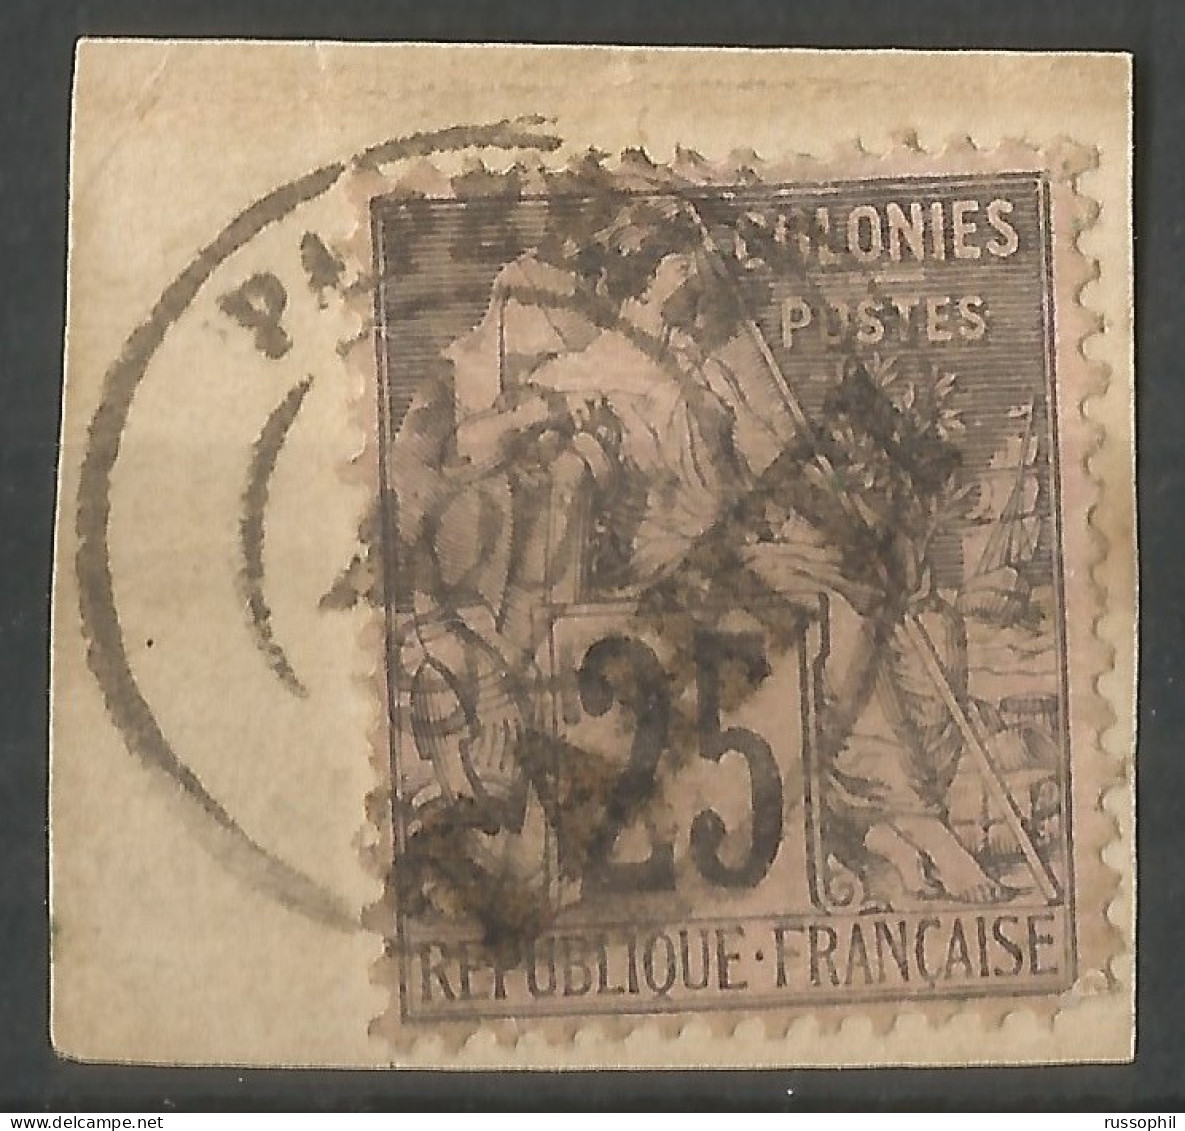 TAHITI - GENERAL COLONIES 25 CENT. OVERCHARGED TAHITI  (Yv. #15) ON FRAGMENT - 1894 - Gebraucht